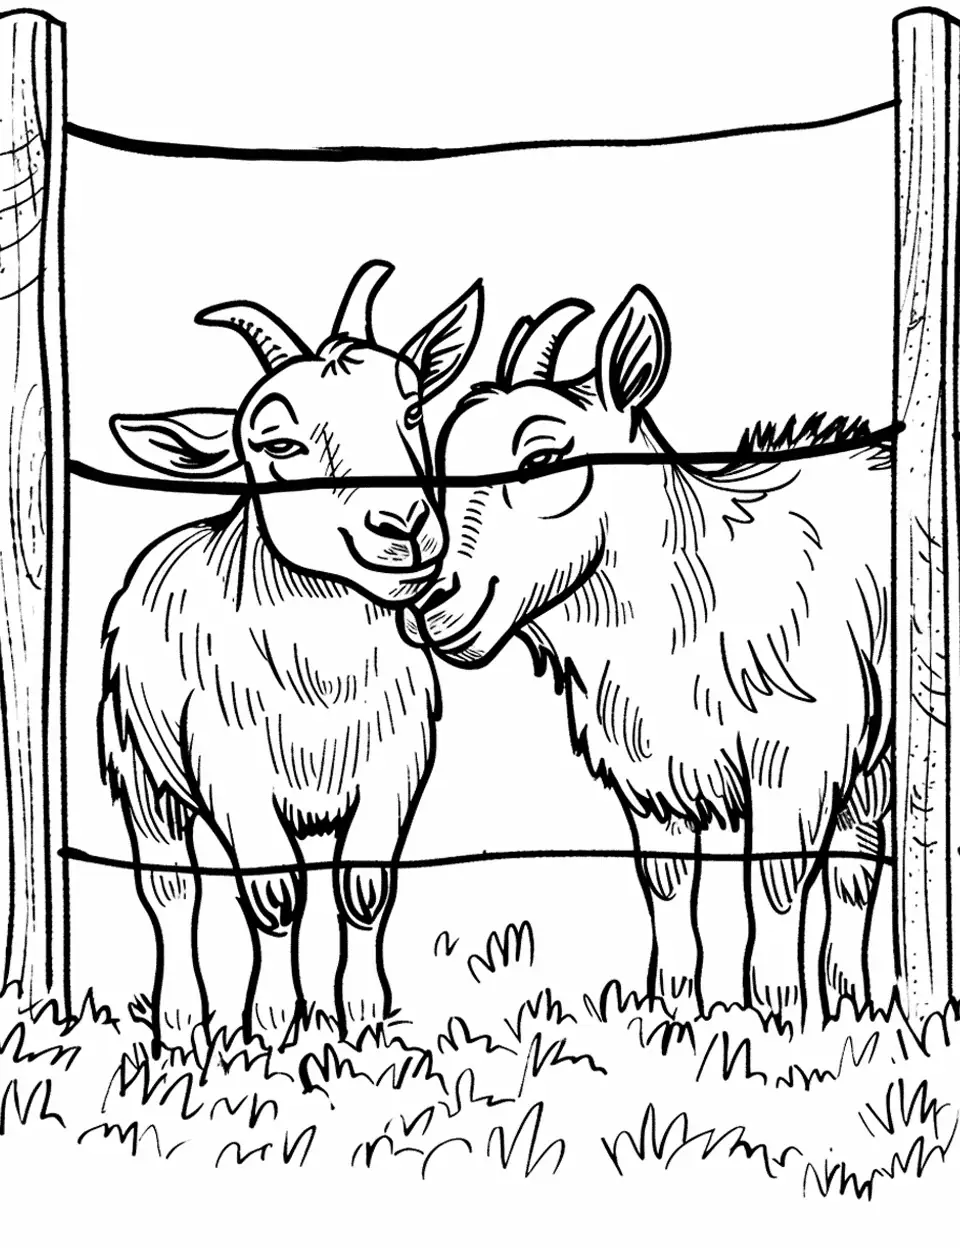 Goat Butting Heads Farm Animal Coloring Page - Two goats in a friendly head-butting moment in a fenced enclosure.